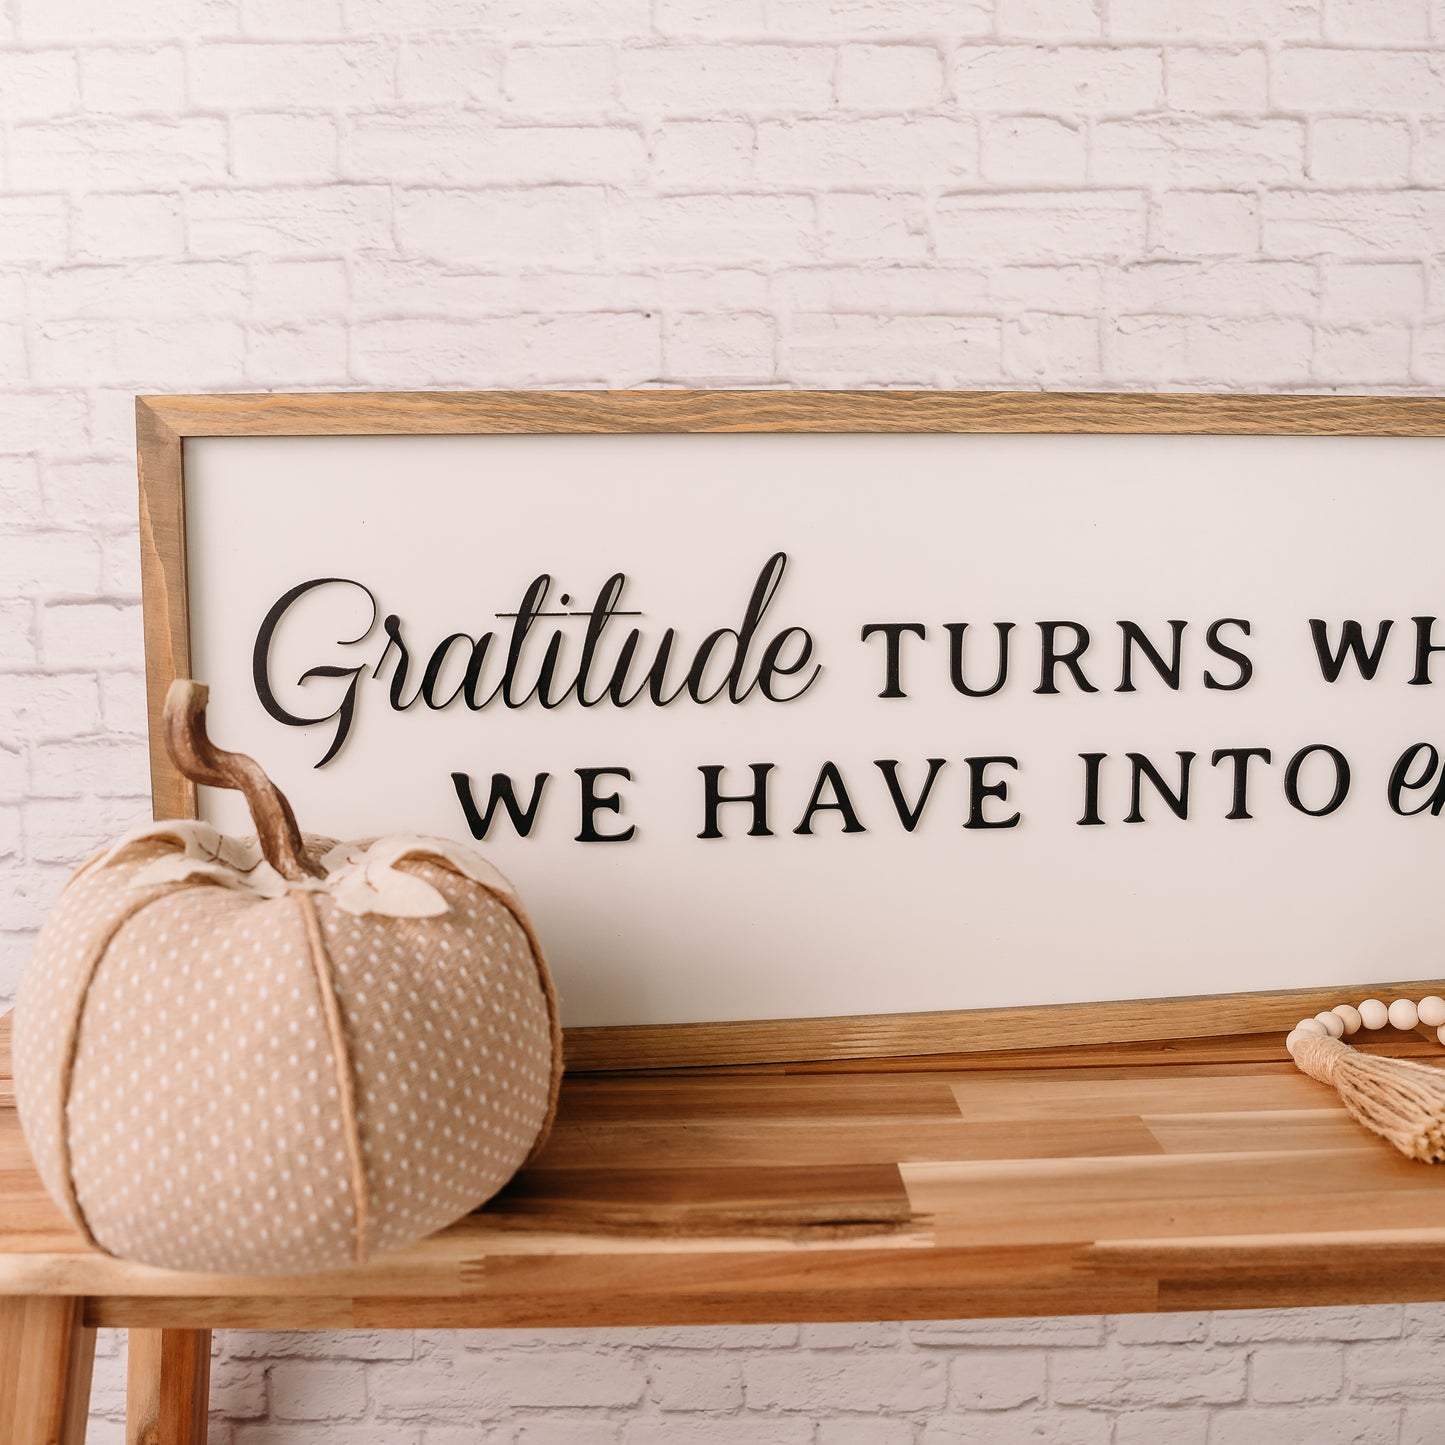 Gratitude Turns What We Have Into Enough | 13x35 inch Wood Sign